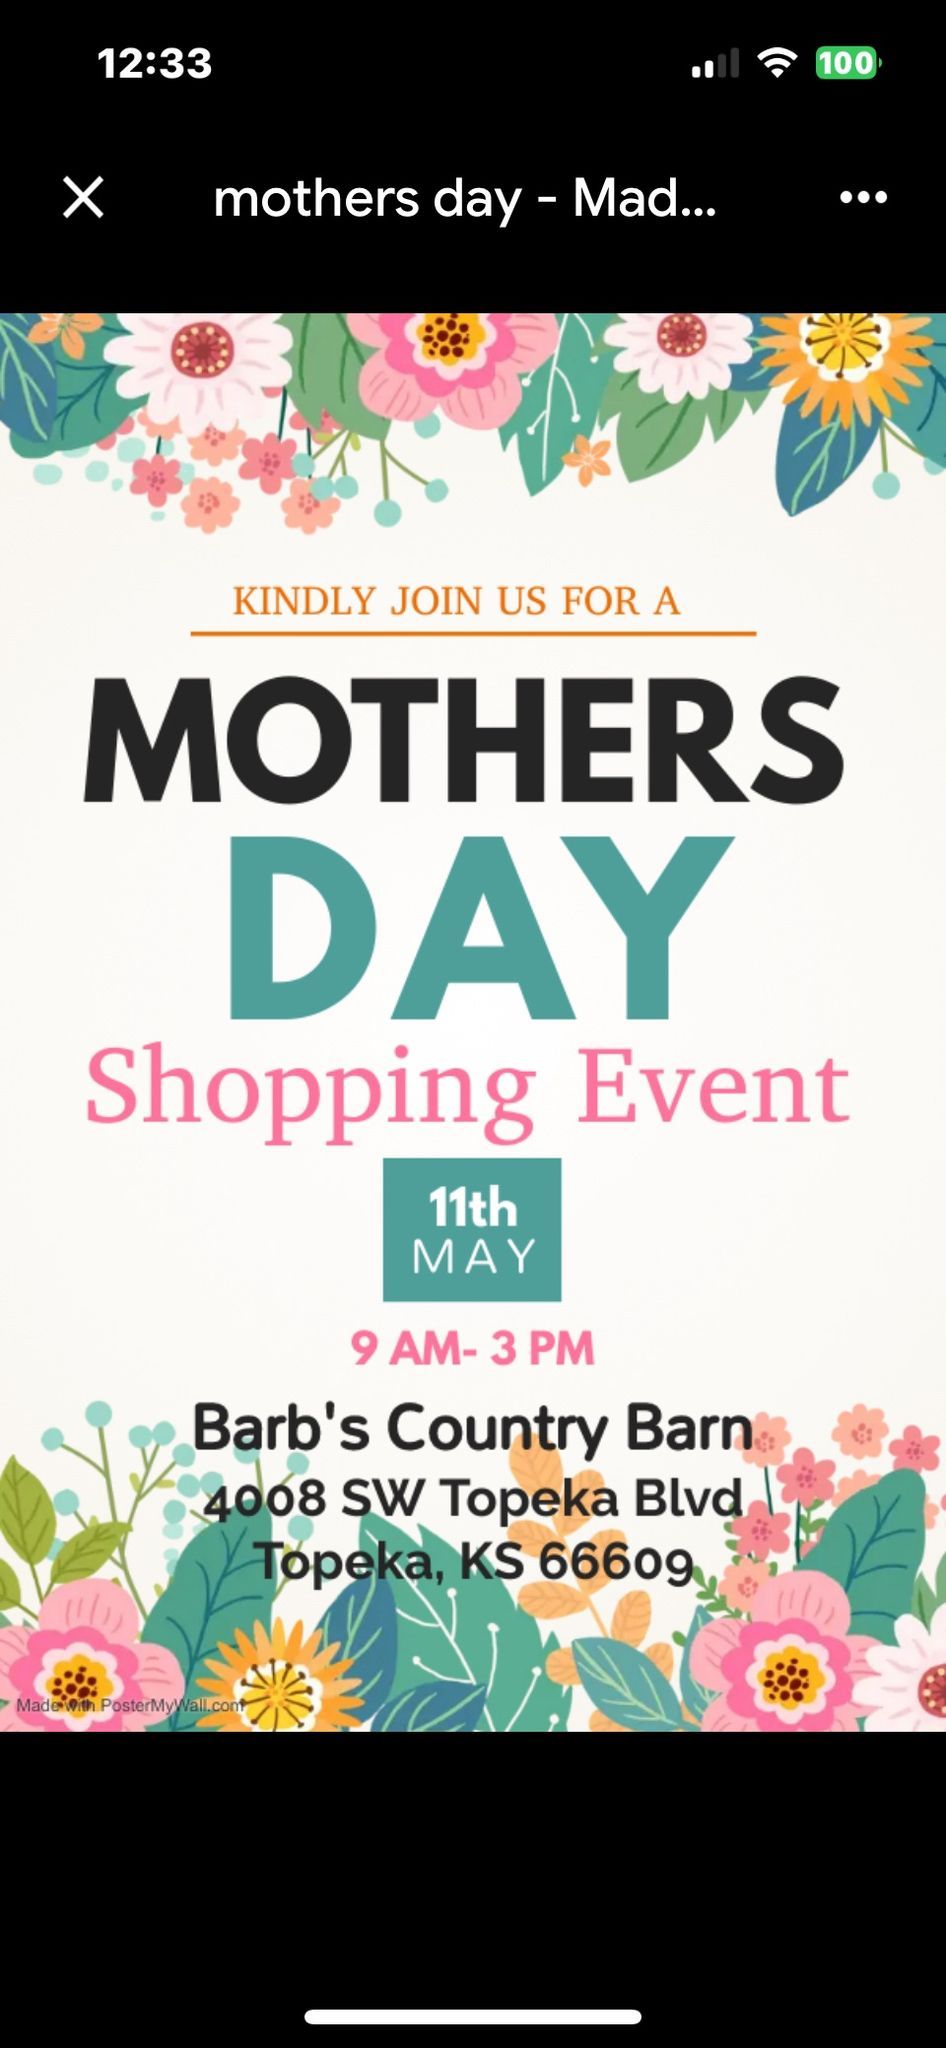 Mothers Day Craft Fair